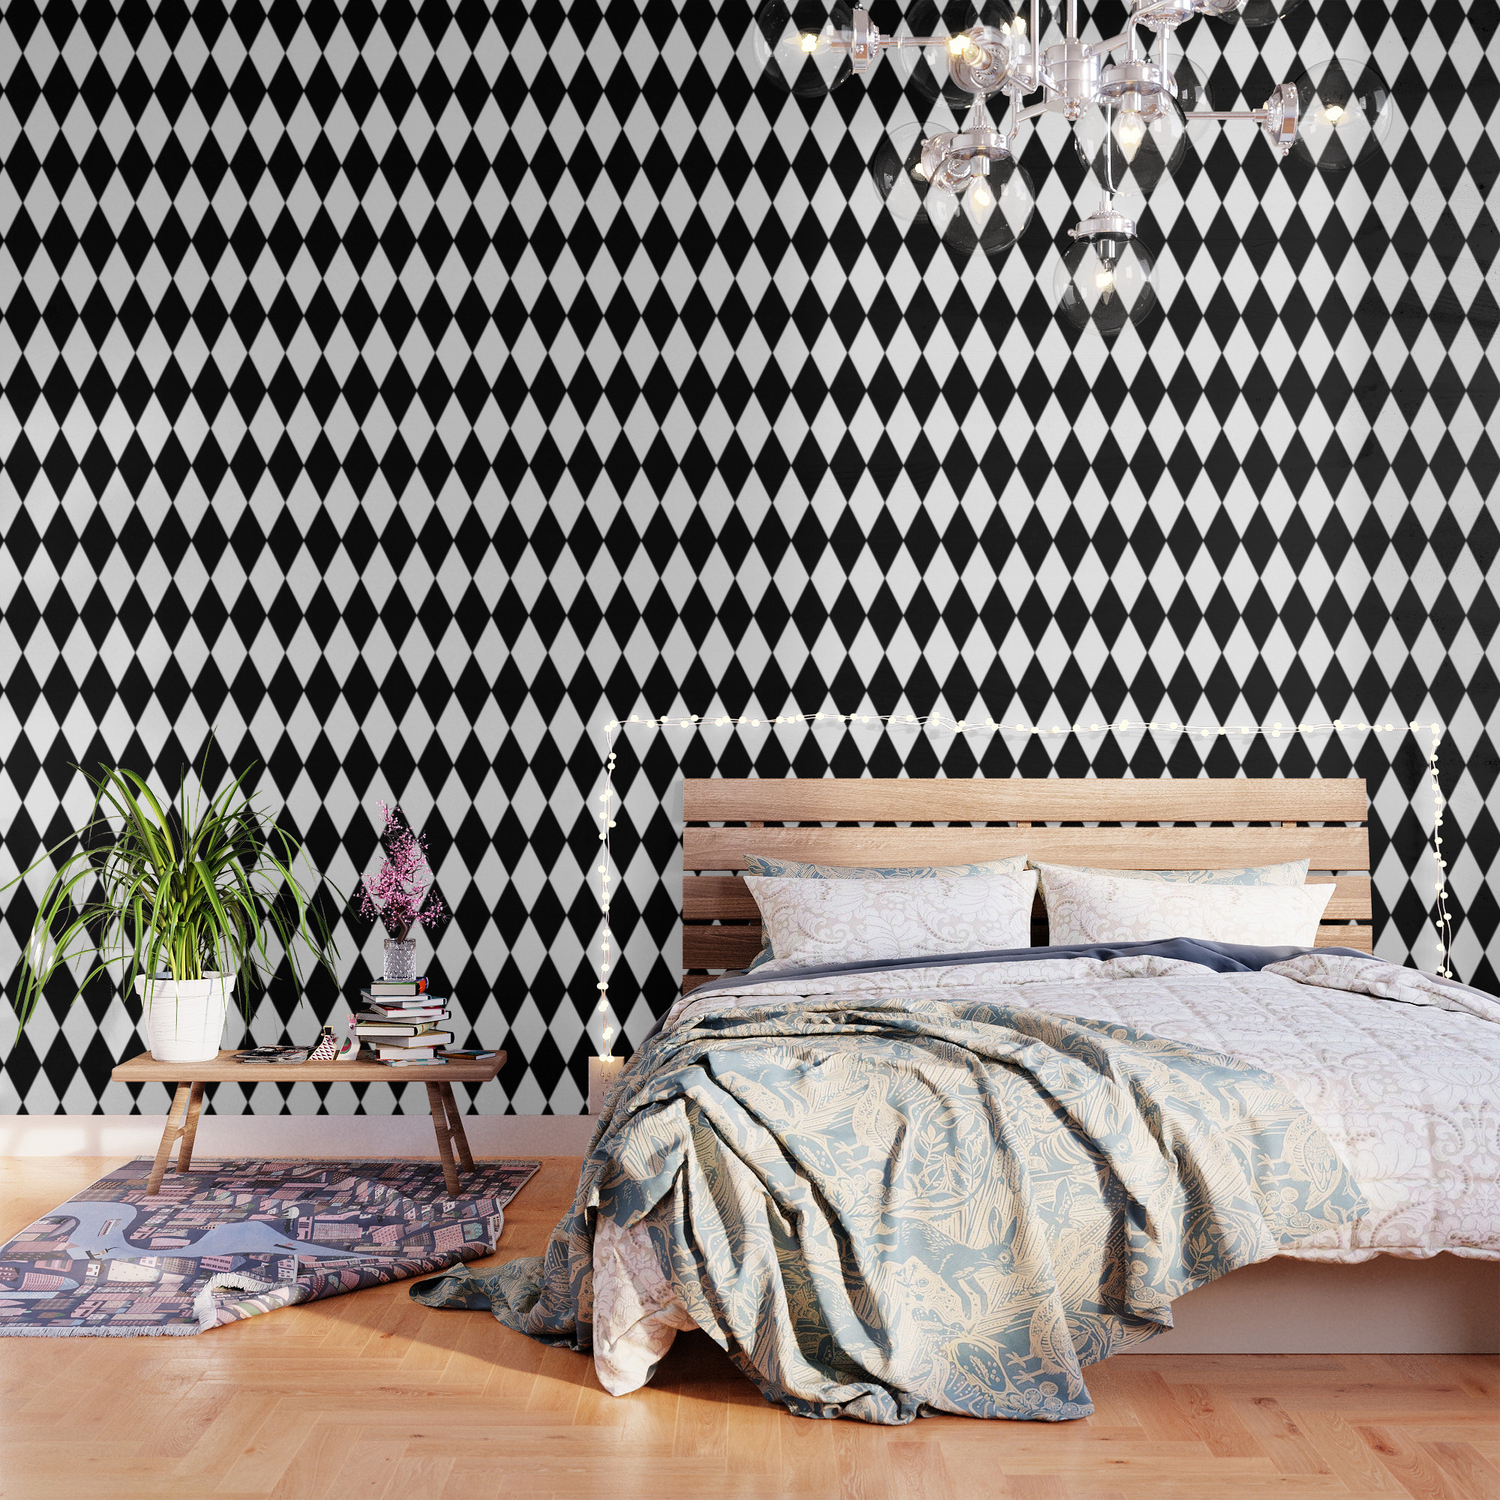 Removable Water-Activated Wallpaper Harlequin Diamonds Geometric Squares Black 